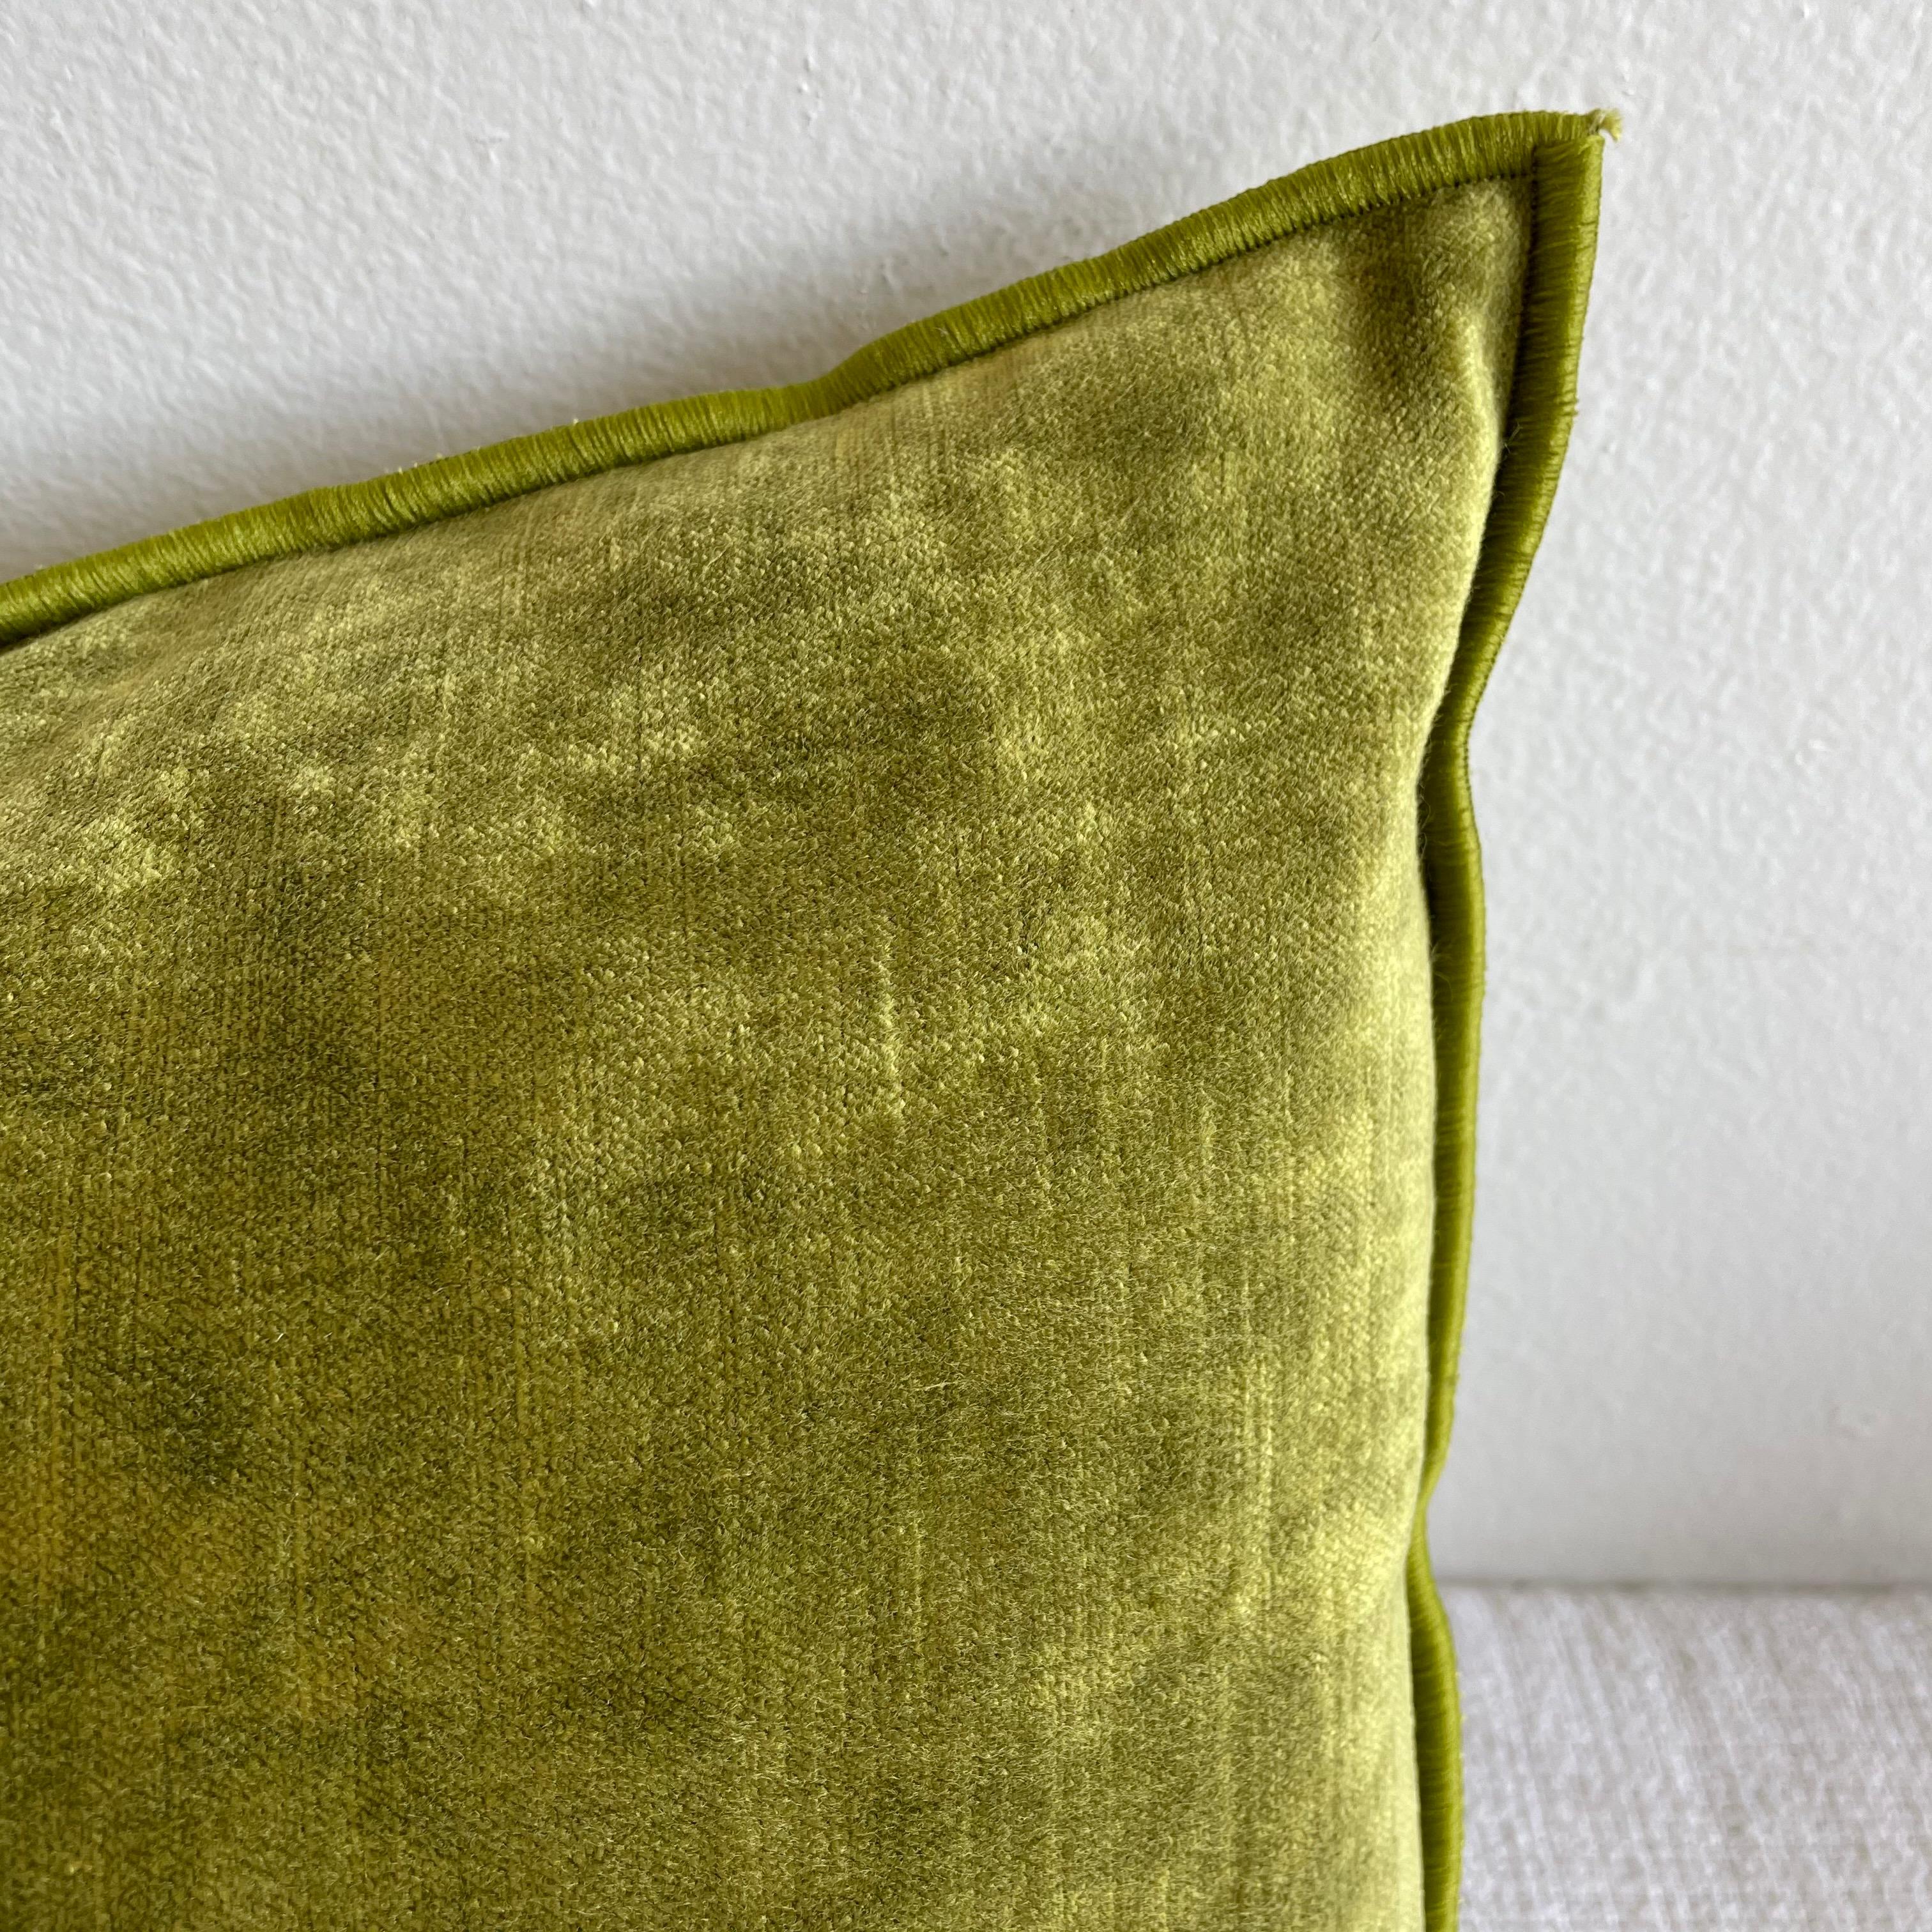 Beautiful French citrus green vintage style velvet lumbar with binded edge. Metal zipper closure, and leather pull. Please allow 6-8 weeks for production. 

Custom made in Paris, France.

Size: 12? x 20?